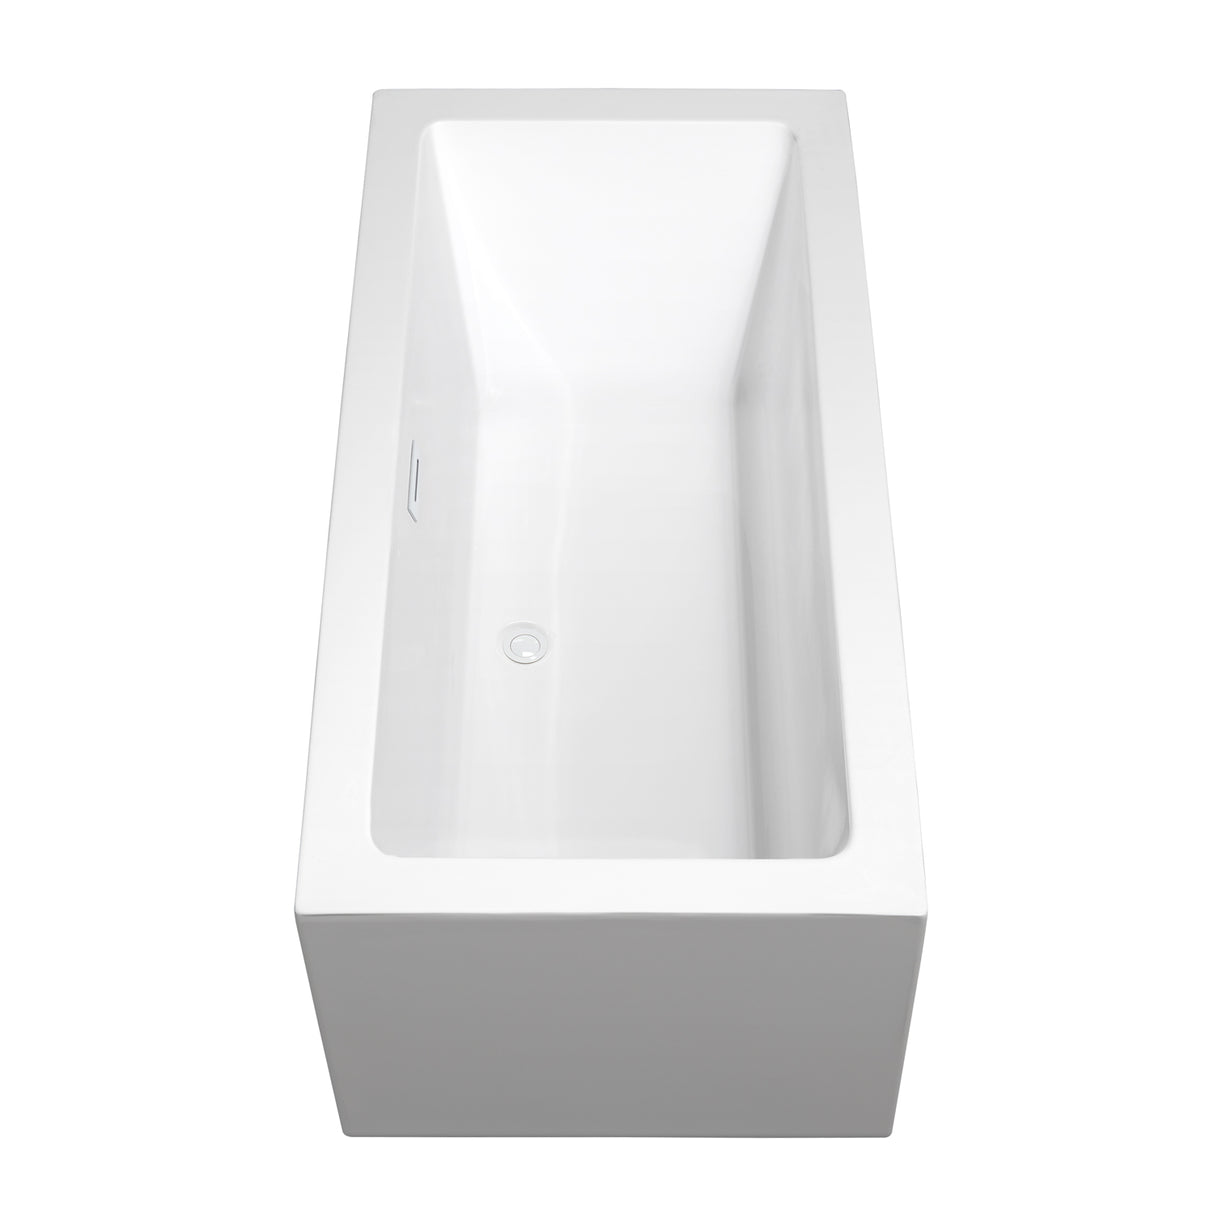 Melody 60 Inch Freestanding Bathtub in White with Shiny White Drain and Overflow Trim